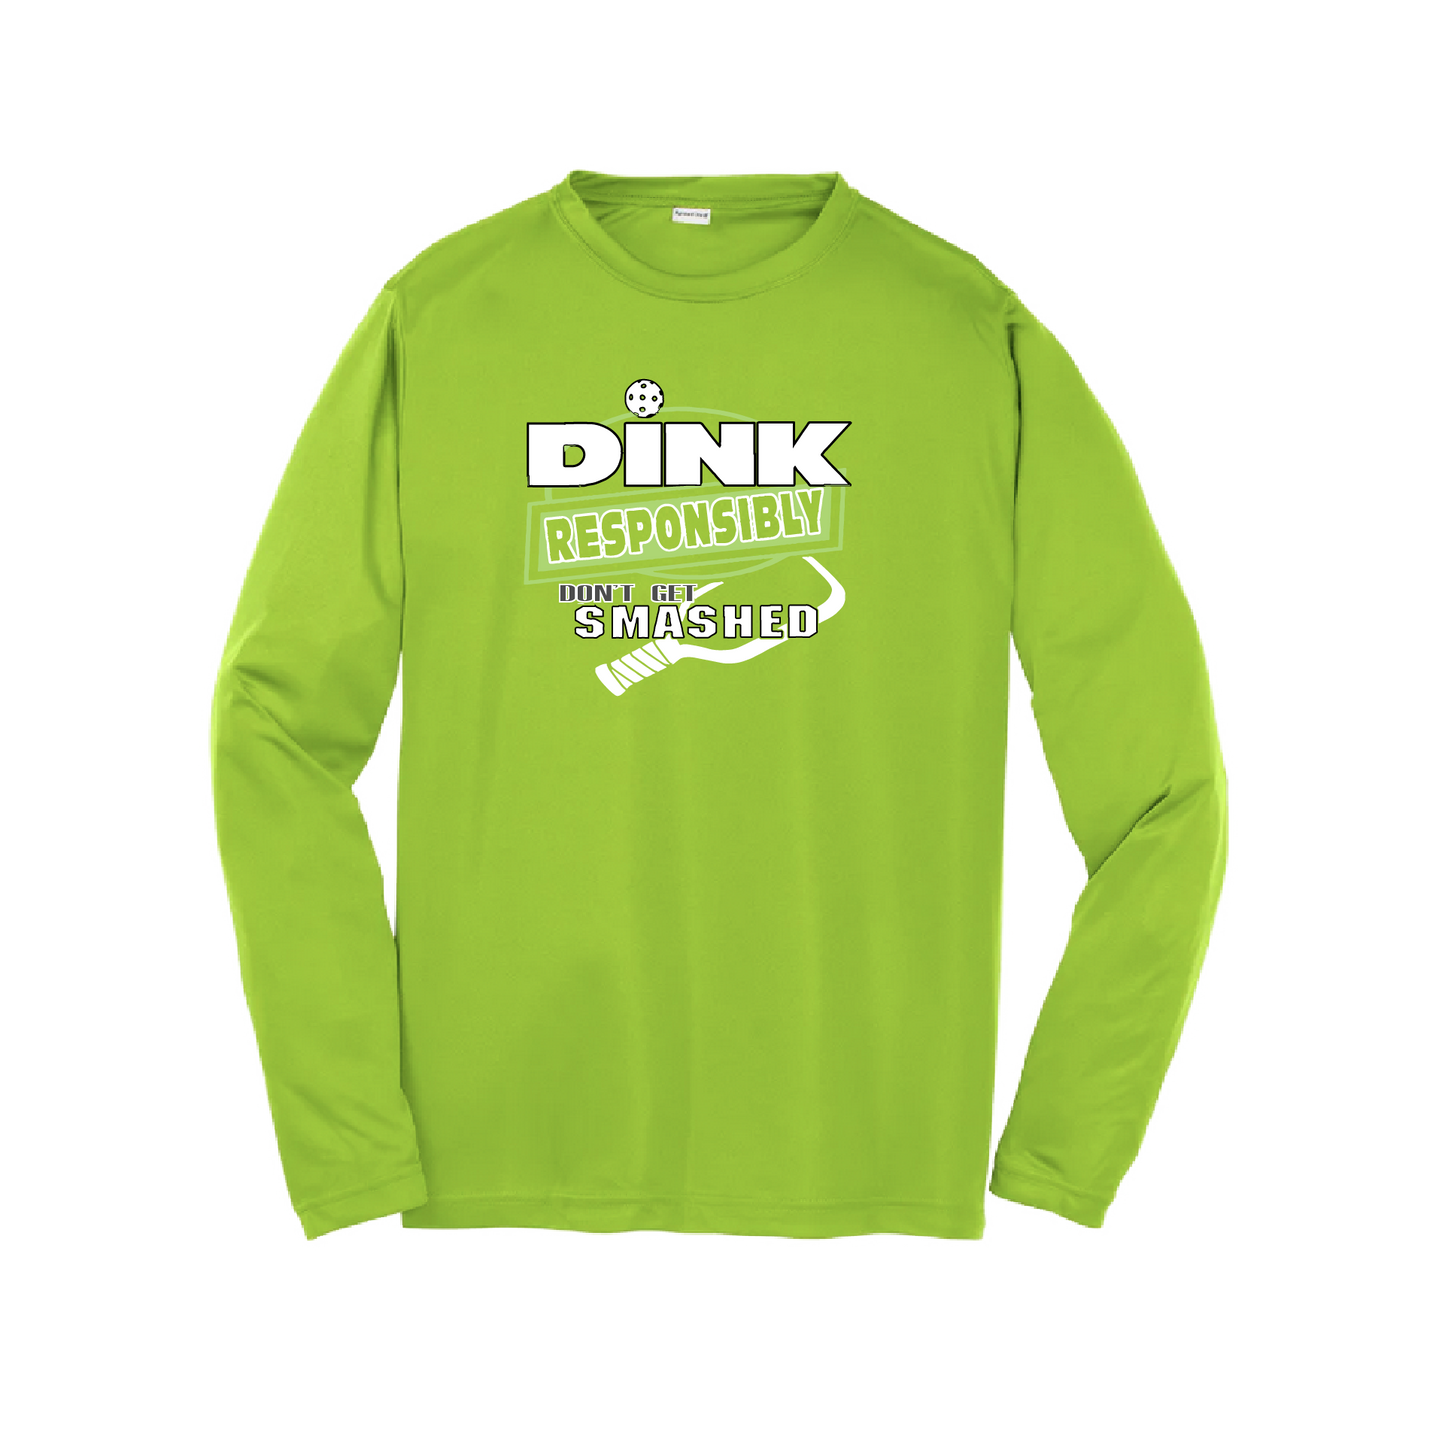 Pickleball Design: Dink Responsibly - Don't Get Smashed  Youth Style: Long Sleeve  Shirts are lightweight, roomy and highly breathable. These moisture-wicking shirts are designed for athletic performance. They feature PosiCharge technology to lock in color and prevent logos from fading. Removable tag and set-in sleeves for comfort.